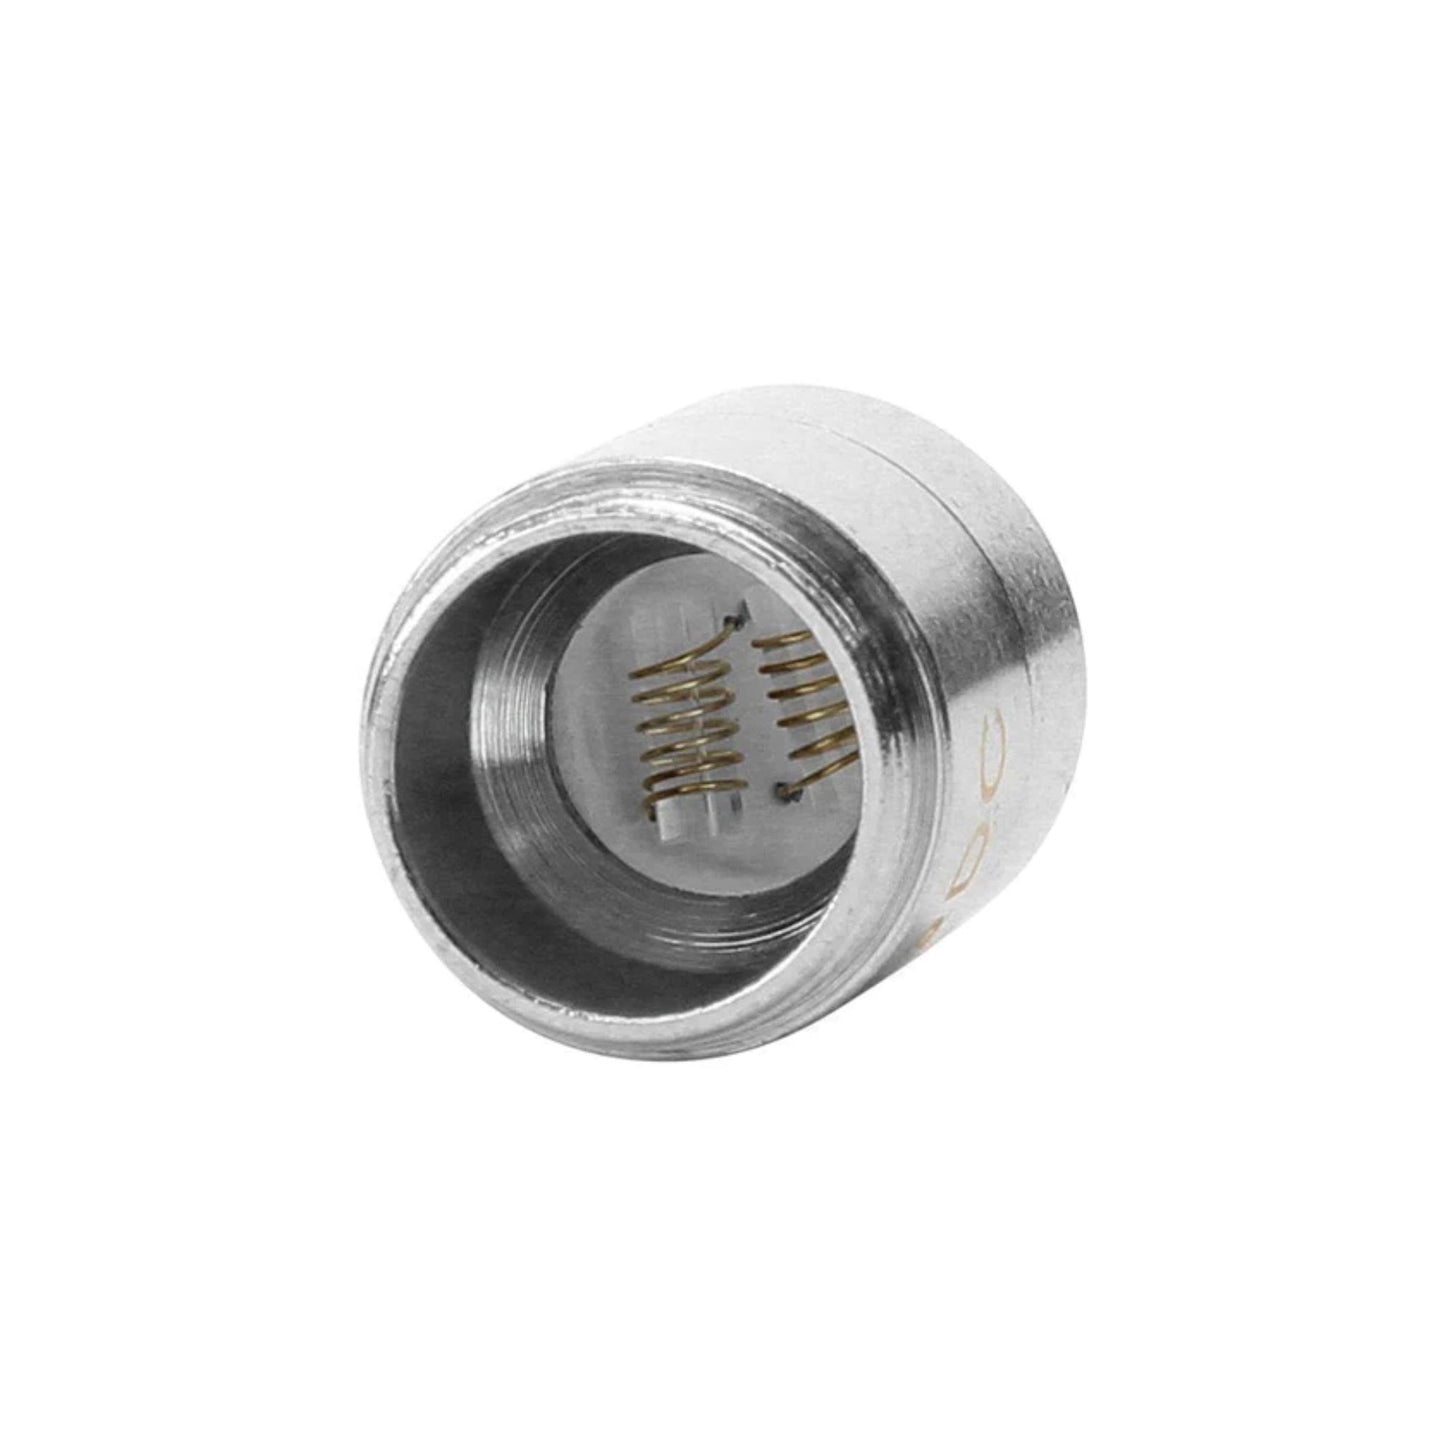 Yocan Dual Quartz Coil Atomizers (5-Pack) by Yocan Tech | Mission Dispensary